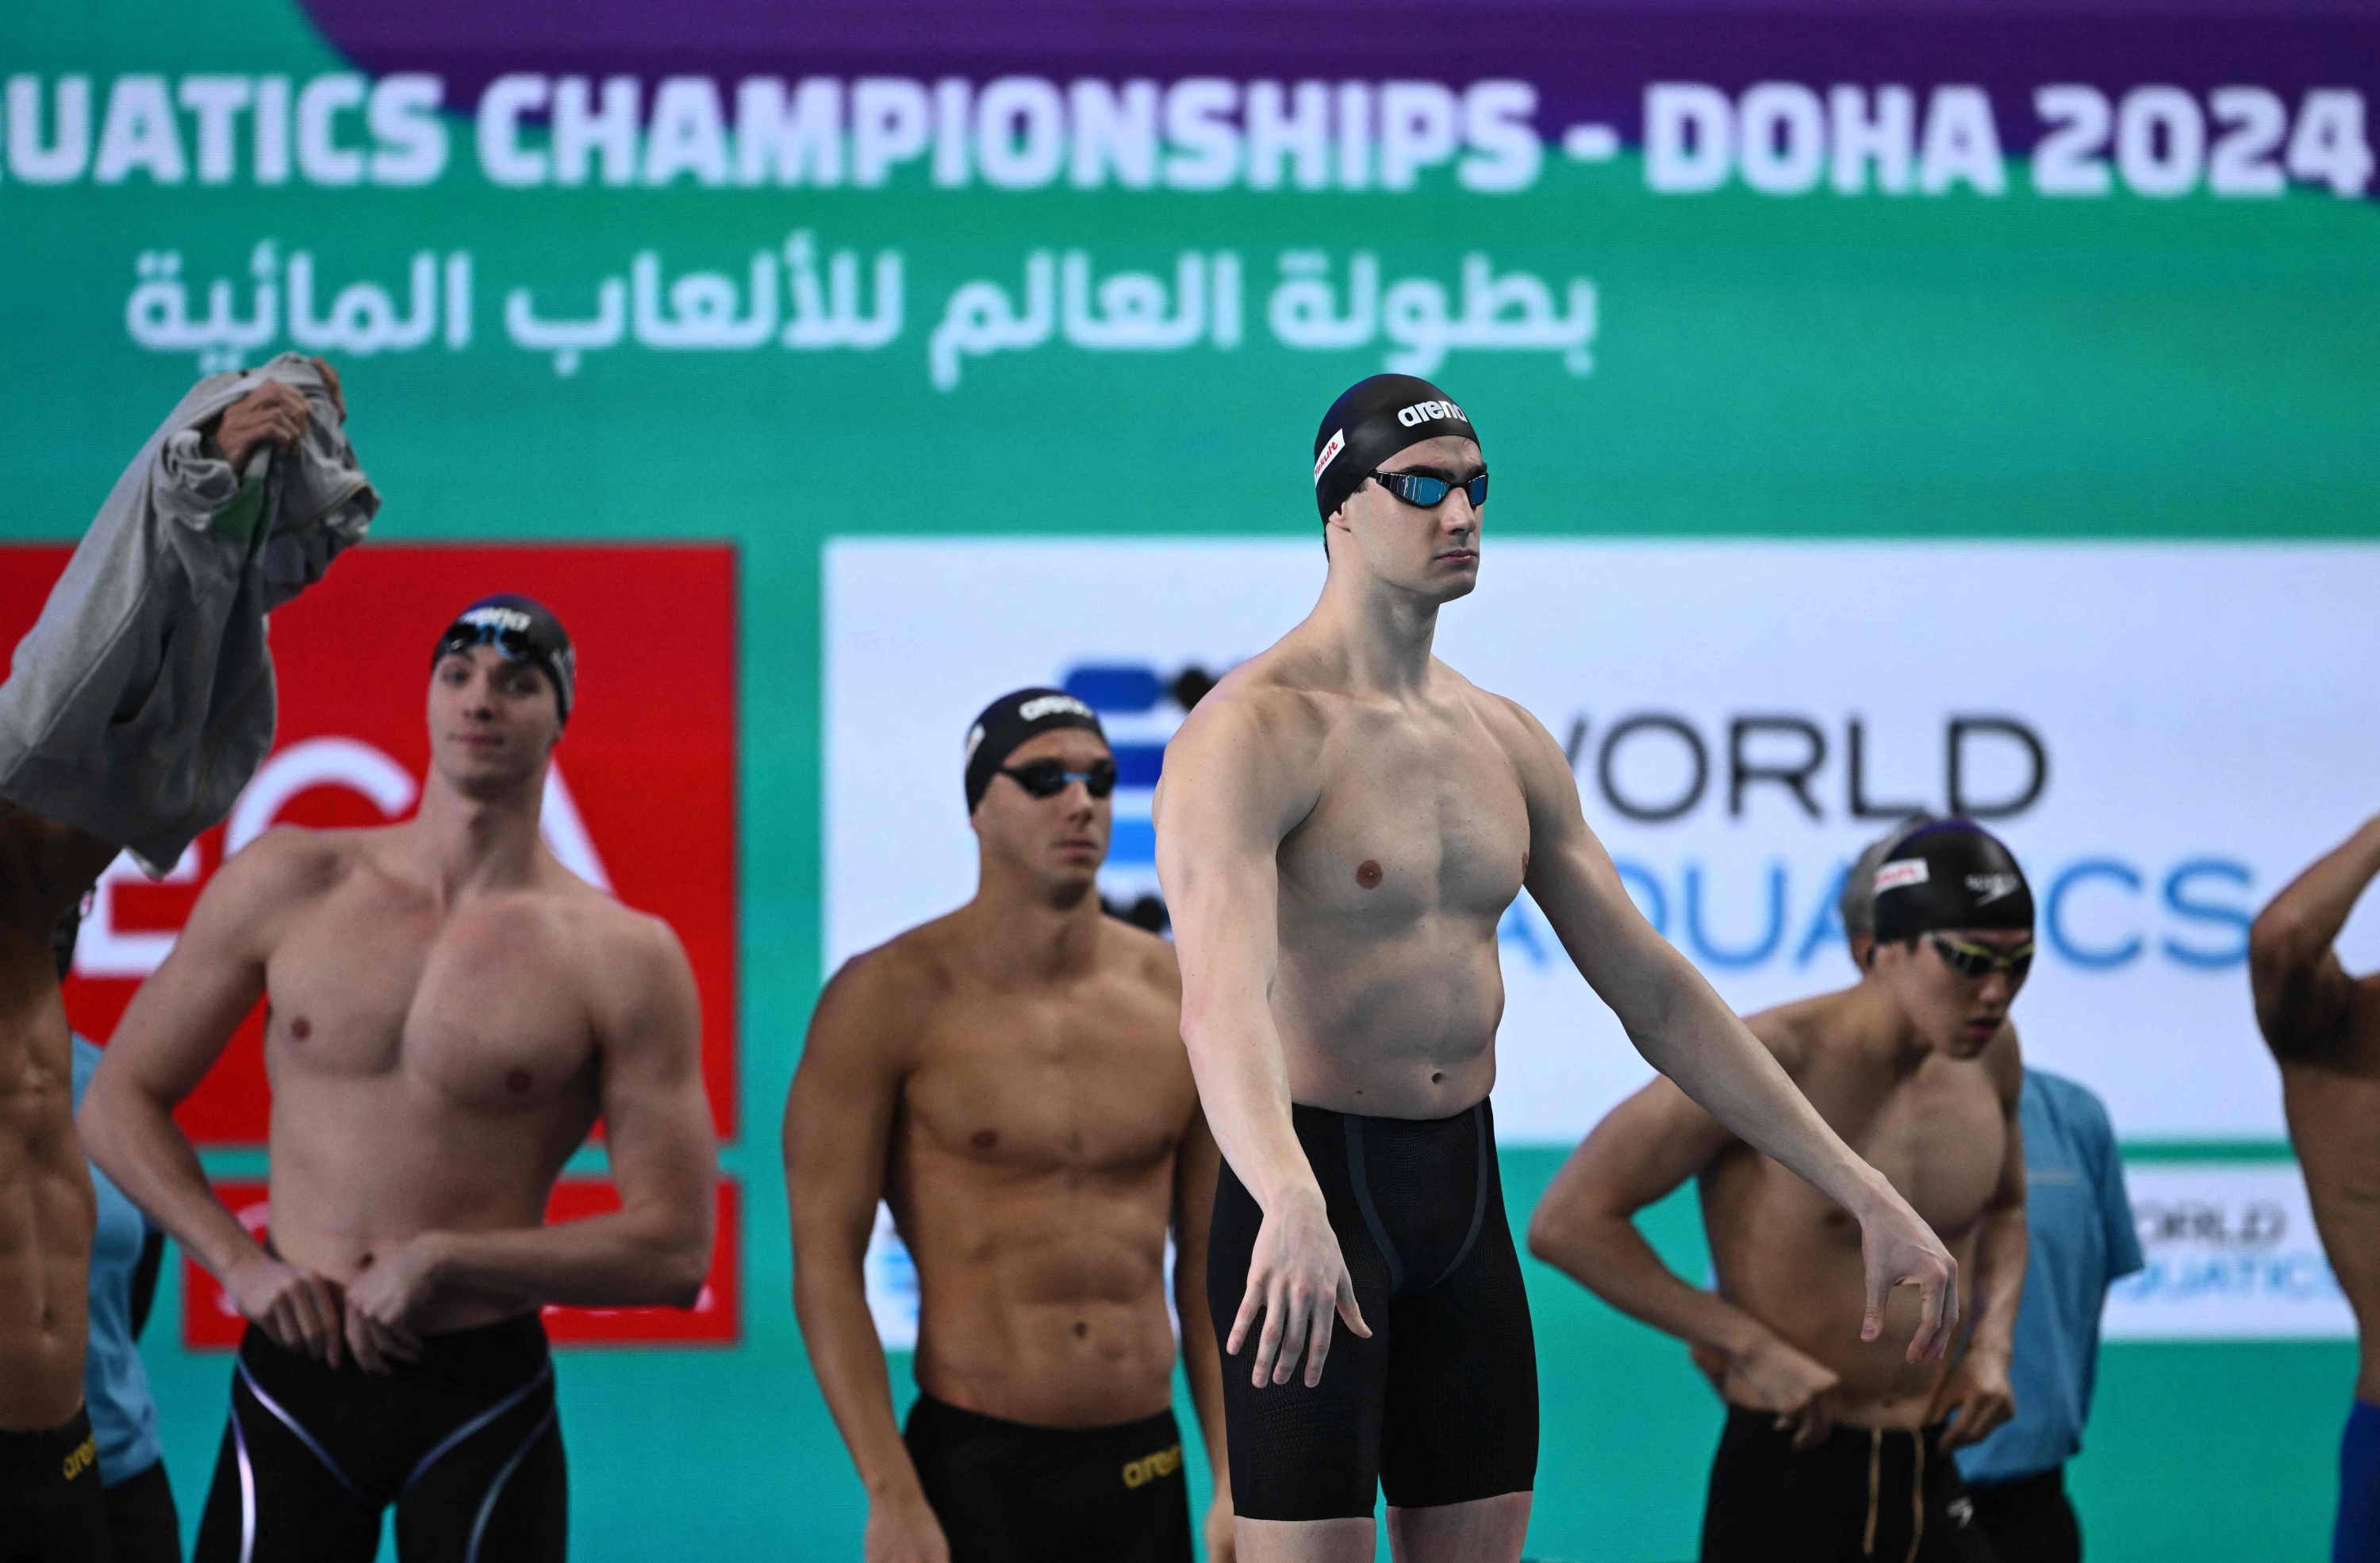 Italy's Lorenzo Zazzeri lines up for a heat during the men's 4X100m freestyle relay swimming event during the 2024 World Aquatics Championships at Aspire Dome in Doha on February 11, 2024. (Photo by SEBASTIEN BOZON / AFP)